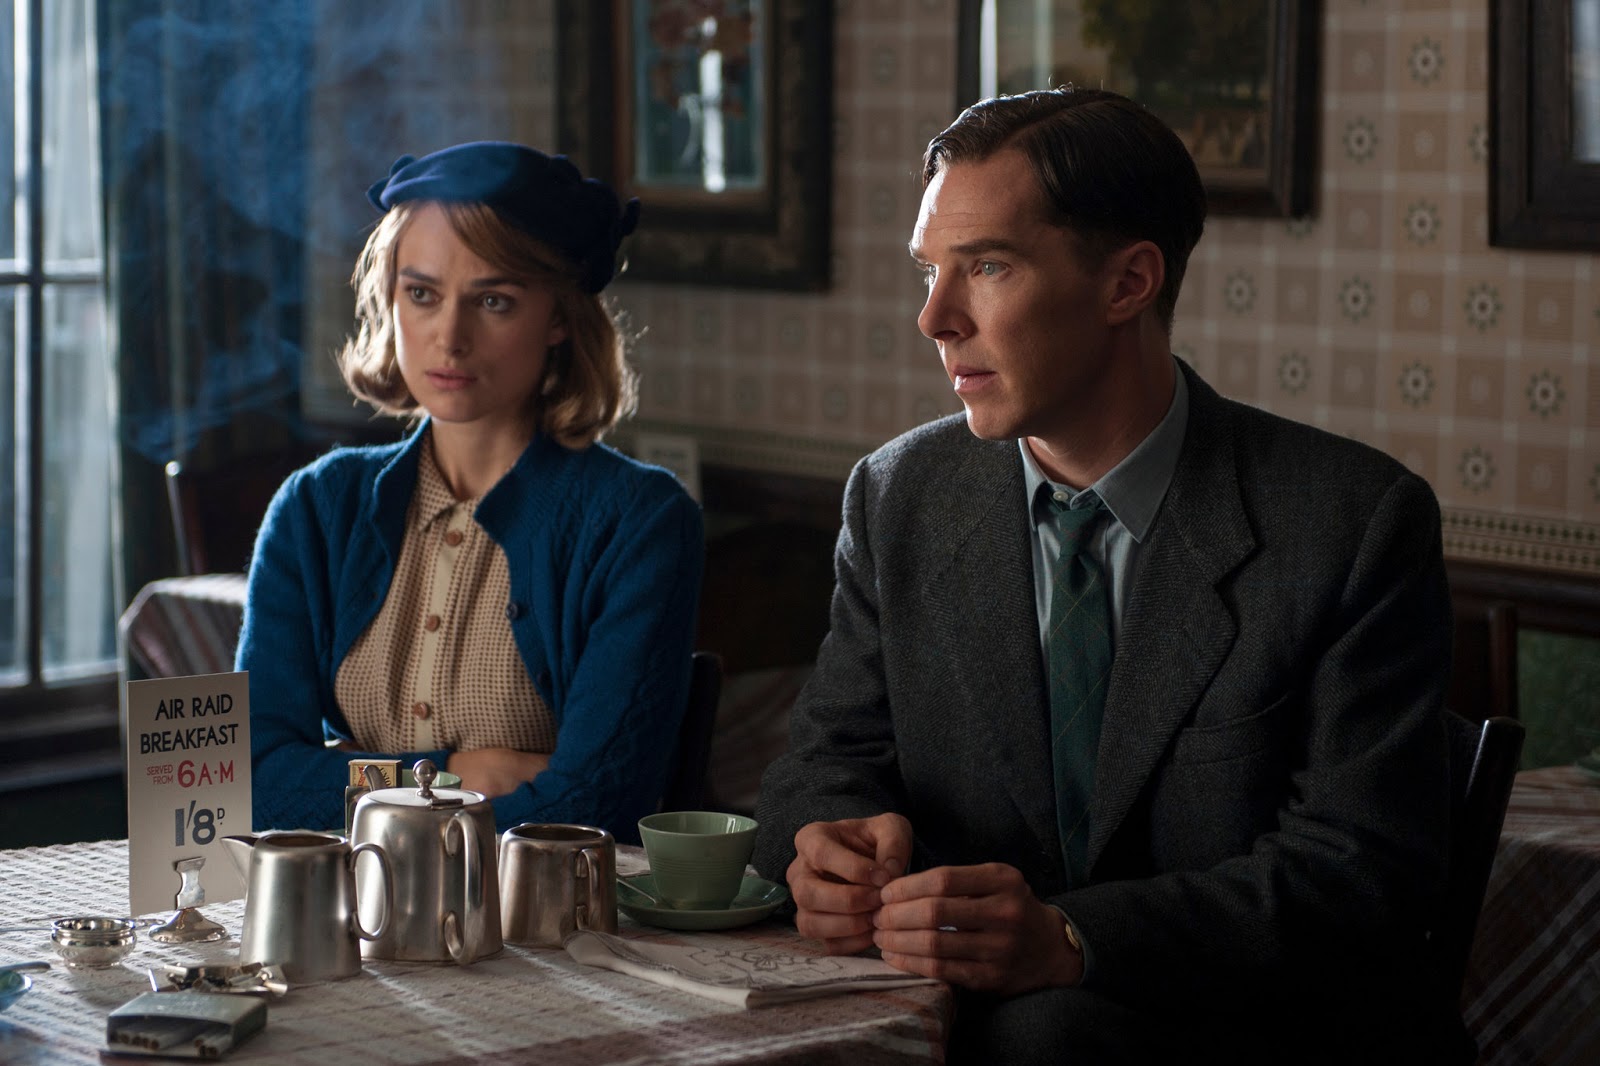 The Butterfly Balcony: Film Fashions - The Imitation Game